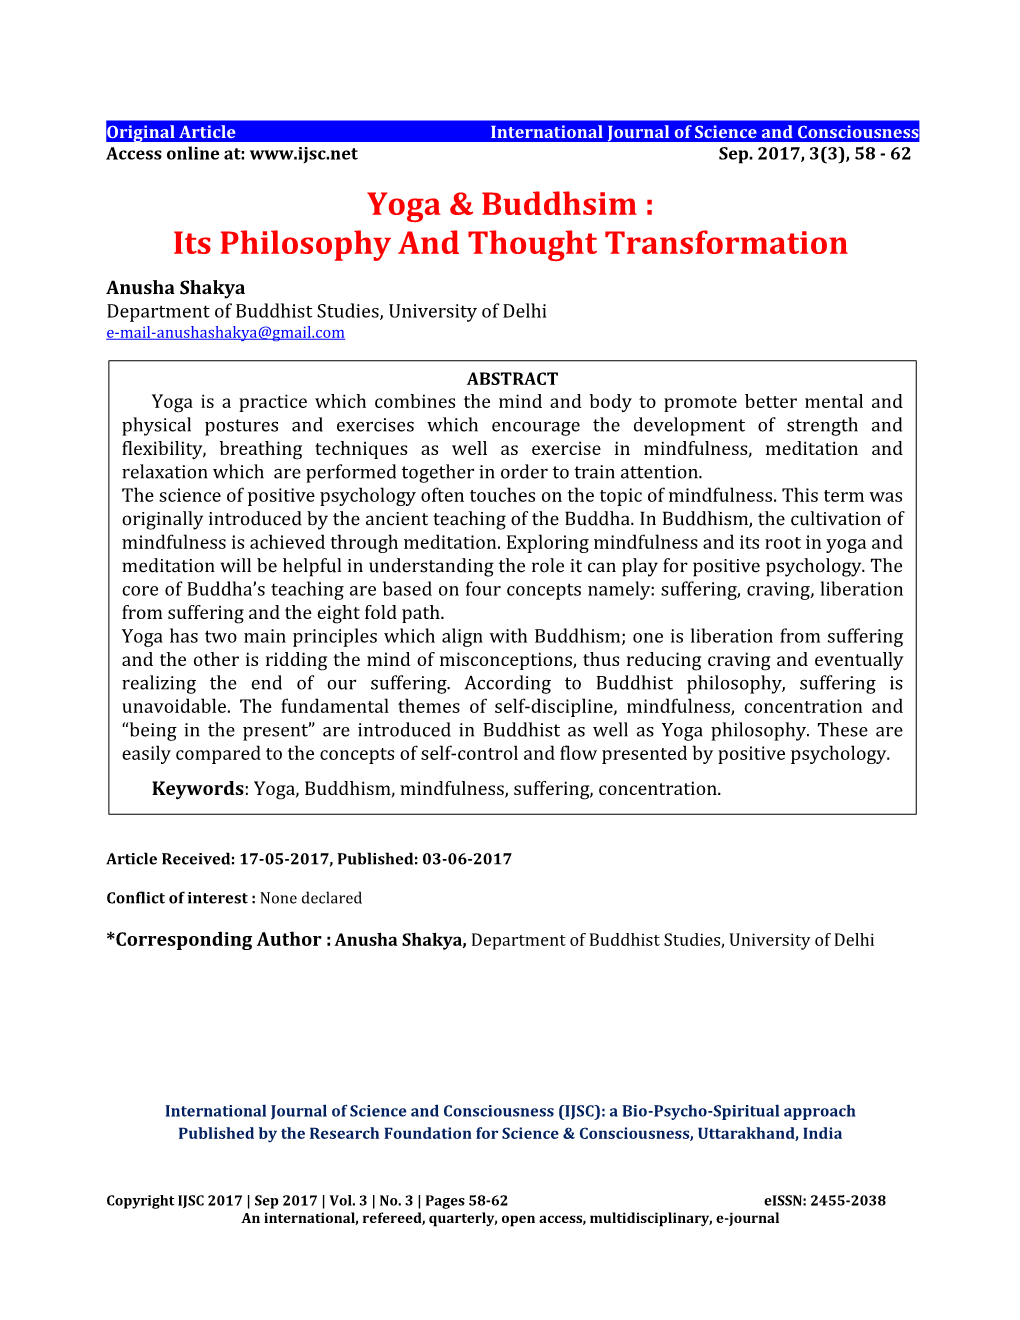 Yoga & Buddhsim : Its Philosophy and Thought Transformation